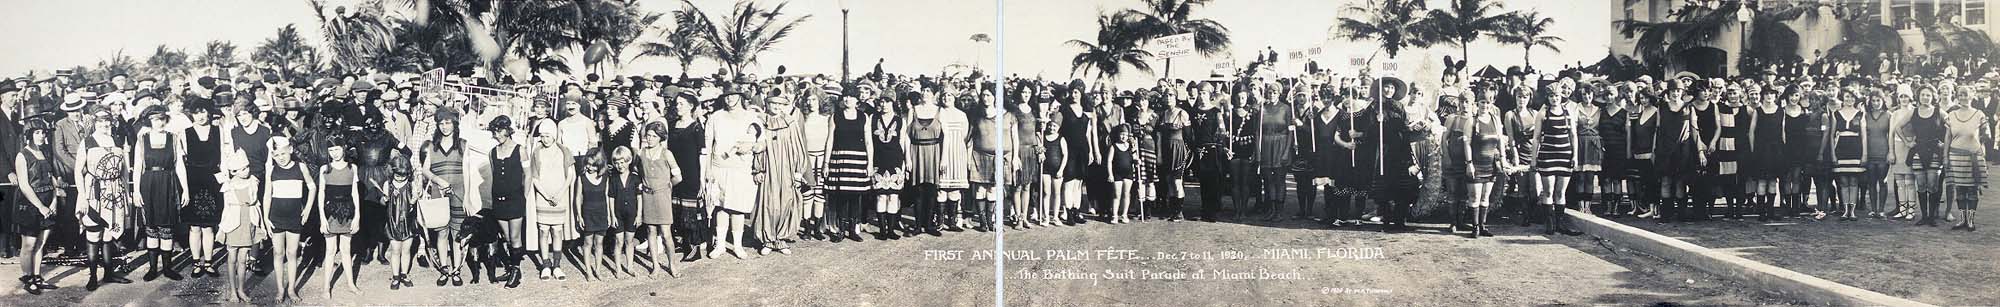 1920 - 1st Annual Palm Fete - The Bathing Suit Parade at Miami Beach